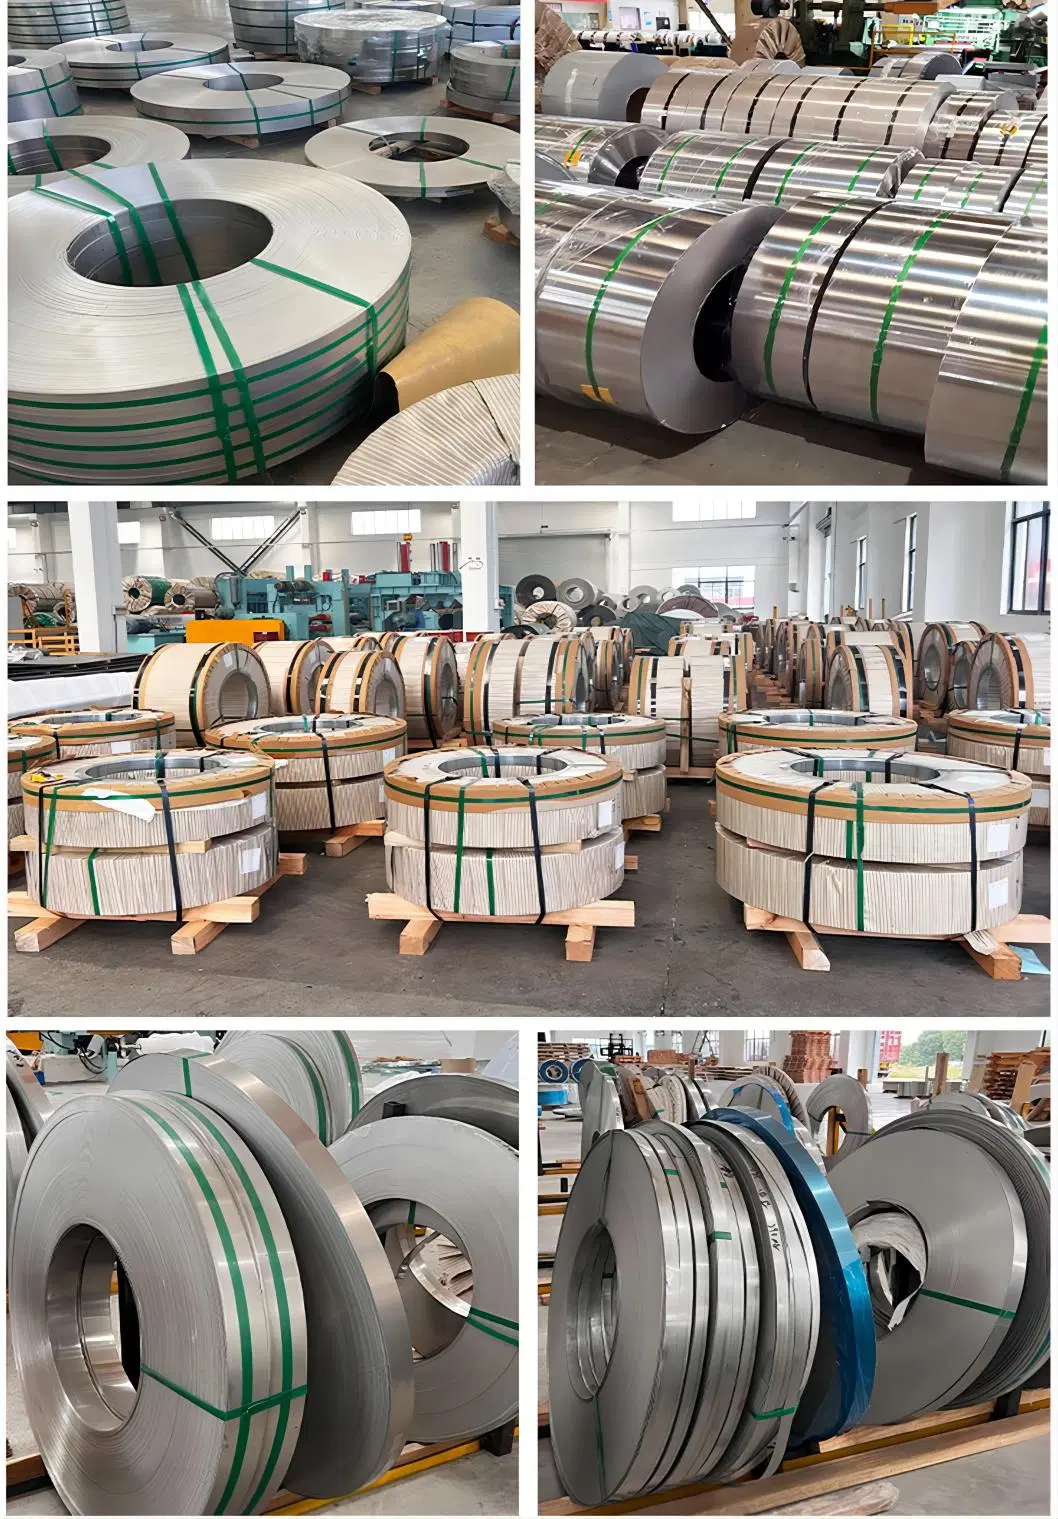 Stainless Steel Sheet 304 304L 316 430 Stainless Steel Plate S32305 904L 4X8 FT Ss Stainless Steel Sheet Plate Board Coil Strip